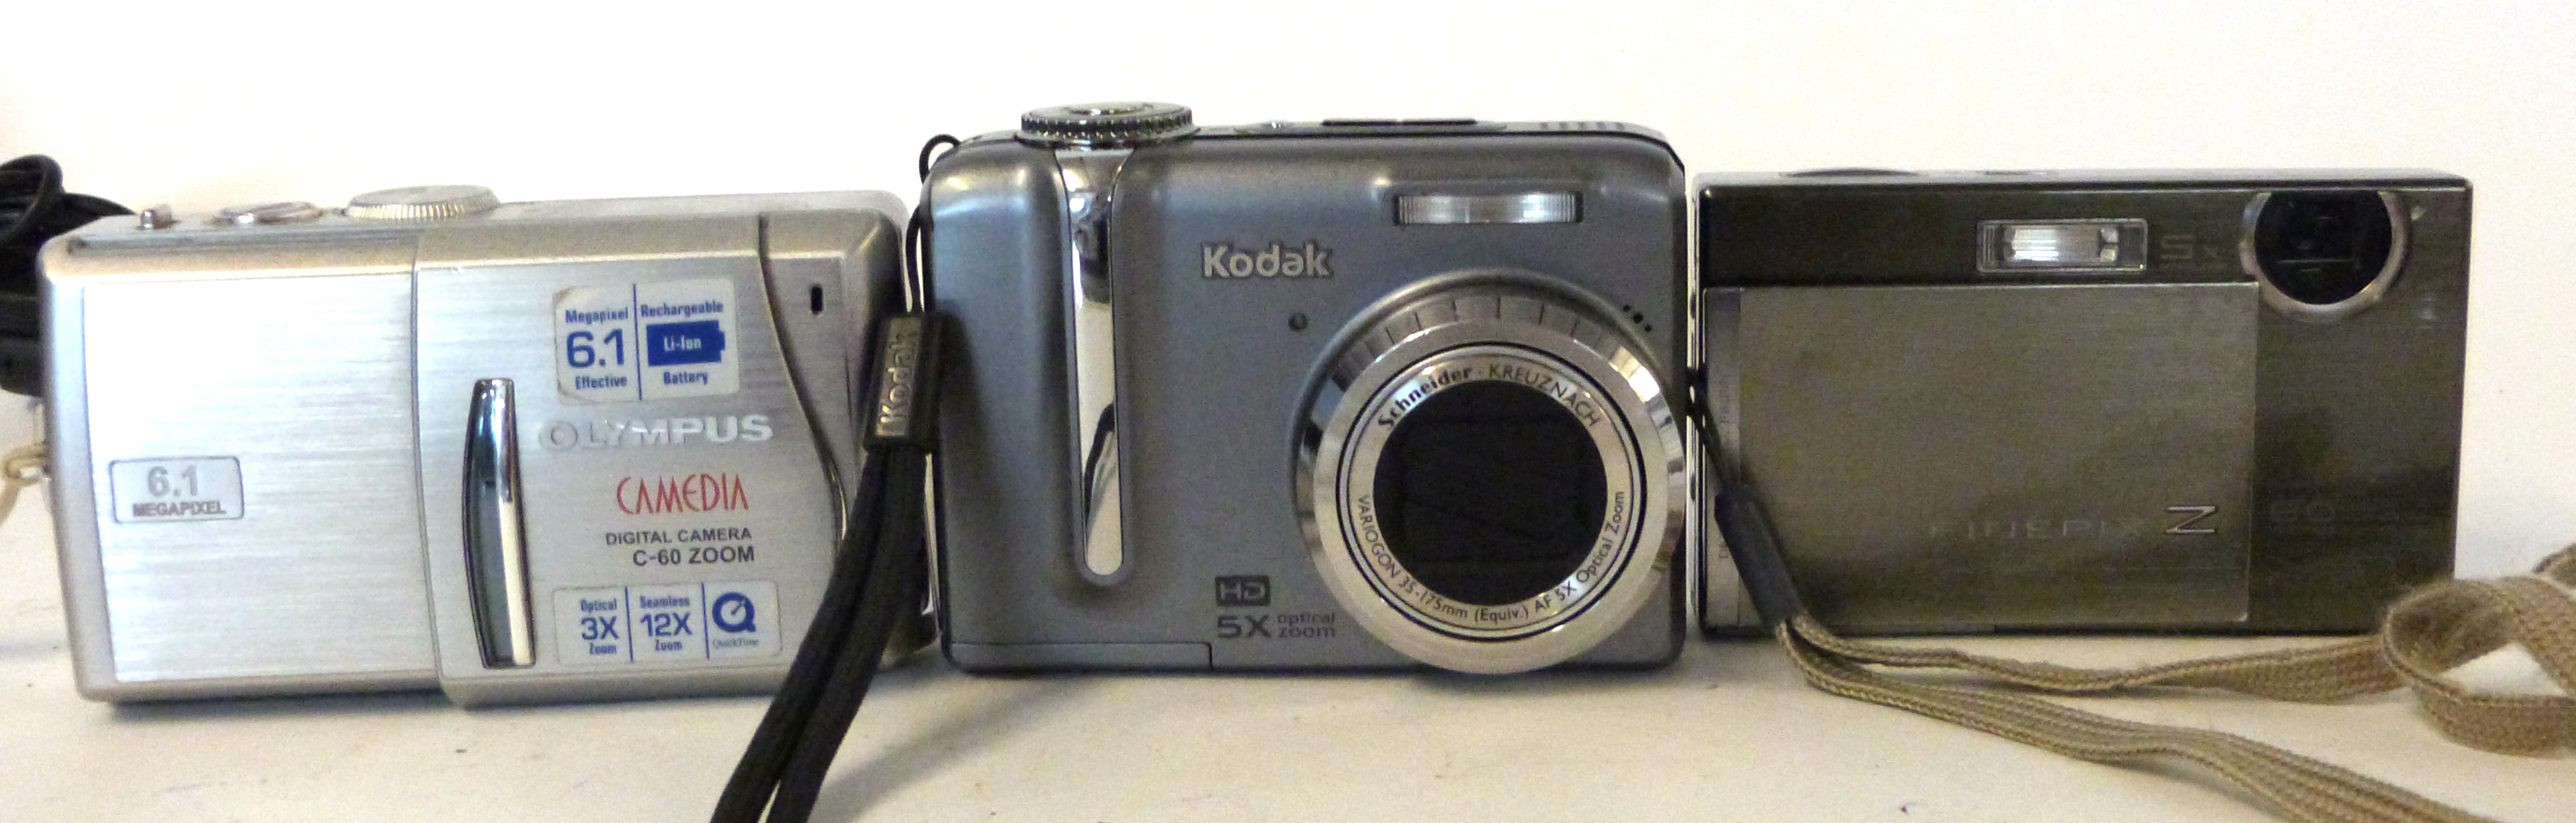 Mixed Lot: Fujifilm Finepix Z100 FD, a Kodad Easyshare 21275 and an Olympus Camedia C-60 - Image 3 of 4